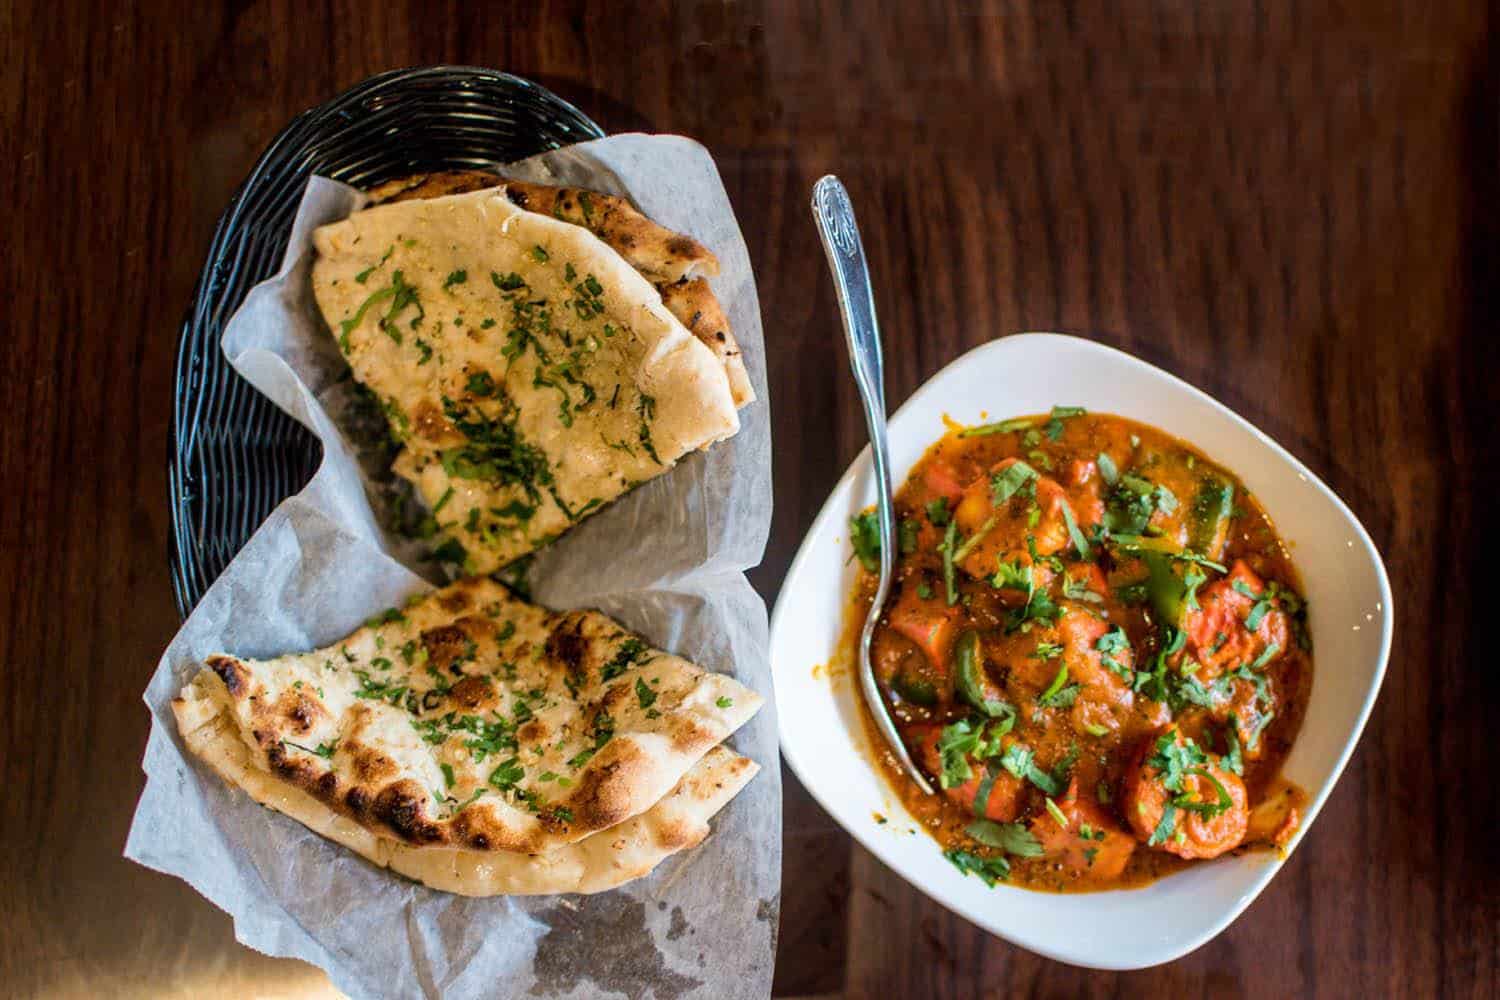 Flatbread and a bowl of curry.